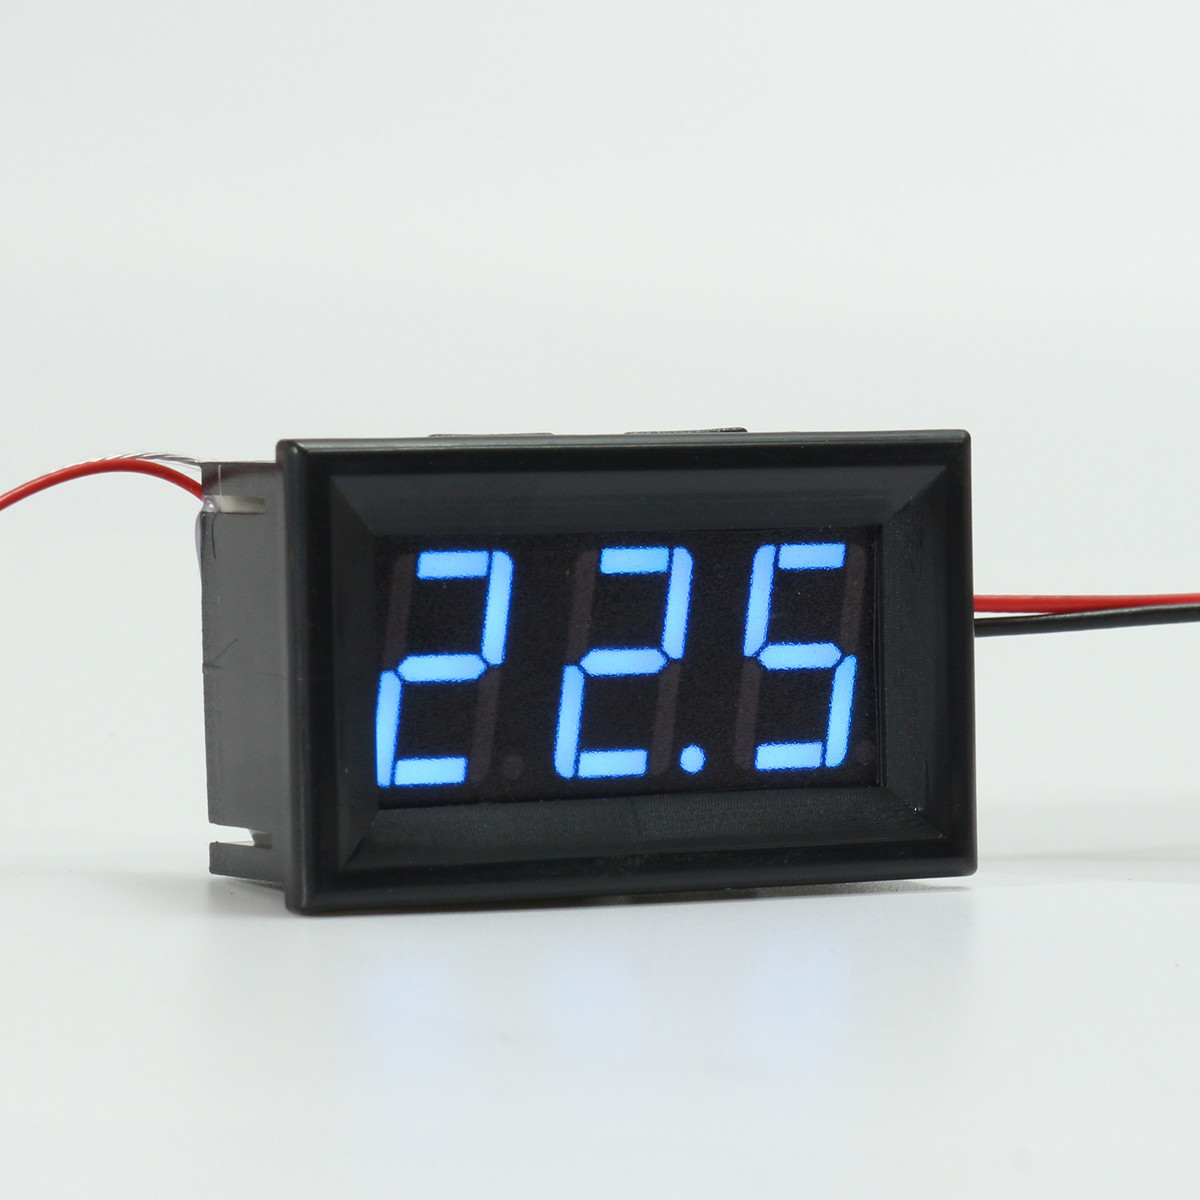 056inch-3-Bit--200450-Digital-LED-Thermometer-Temerature-Tester-PT100-Blue-Backlight-1127164